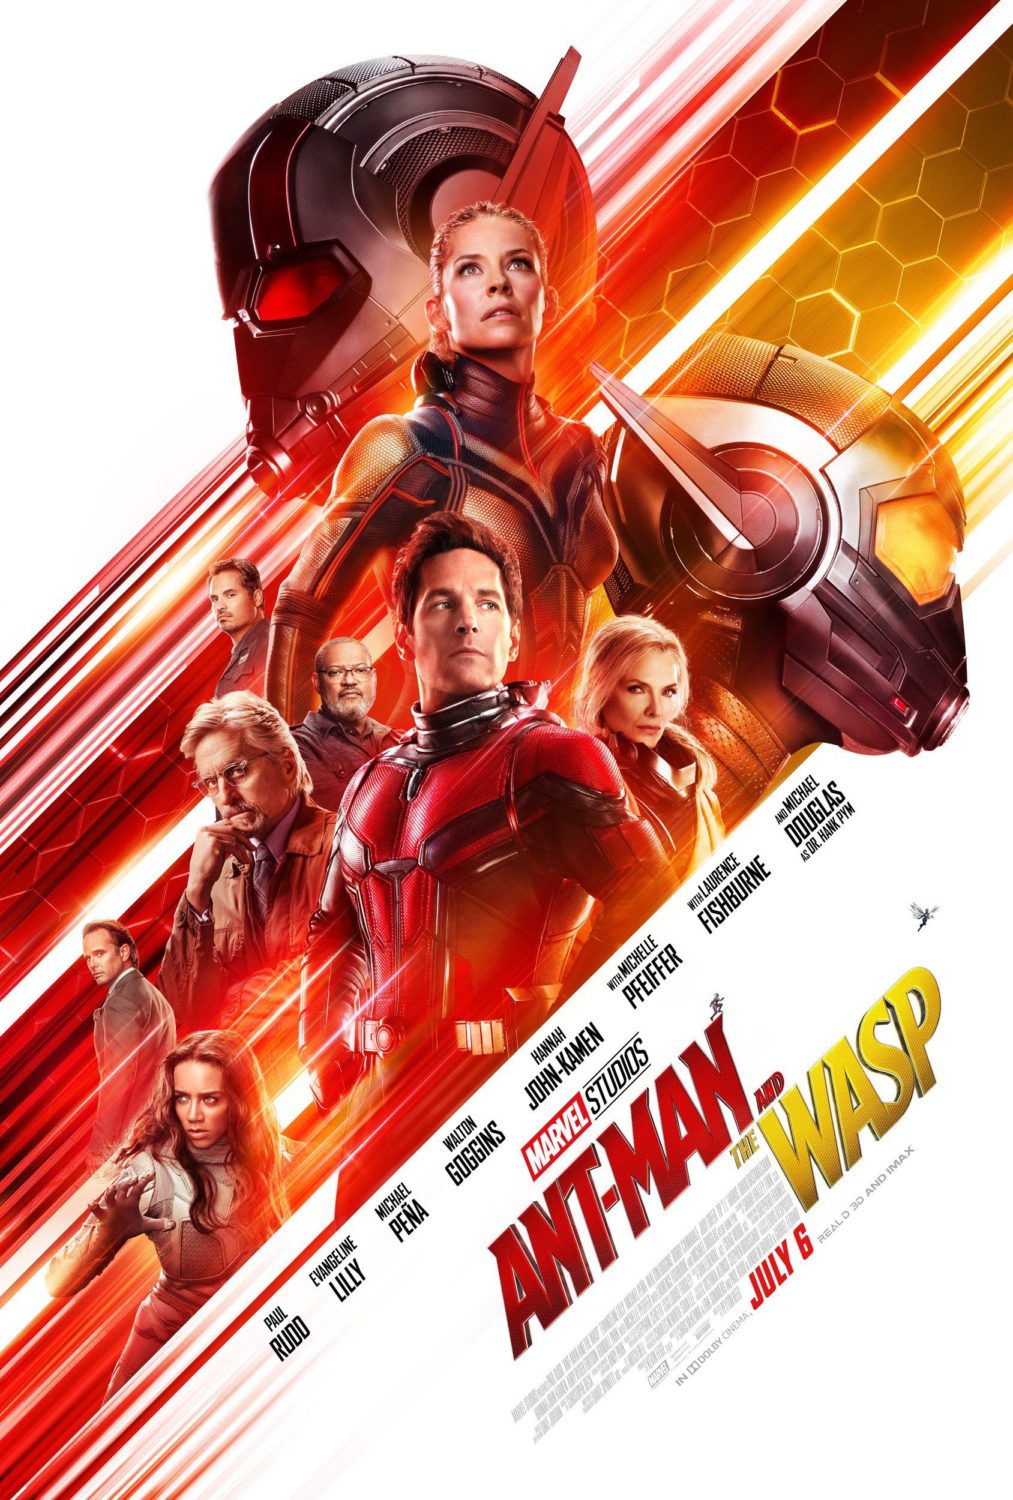 Ant-Man and The Wasp poster from successful Lost Boys School of VFX alumni film credits for Visual Effects.